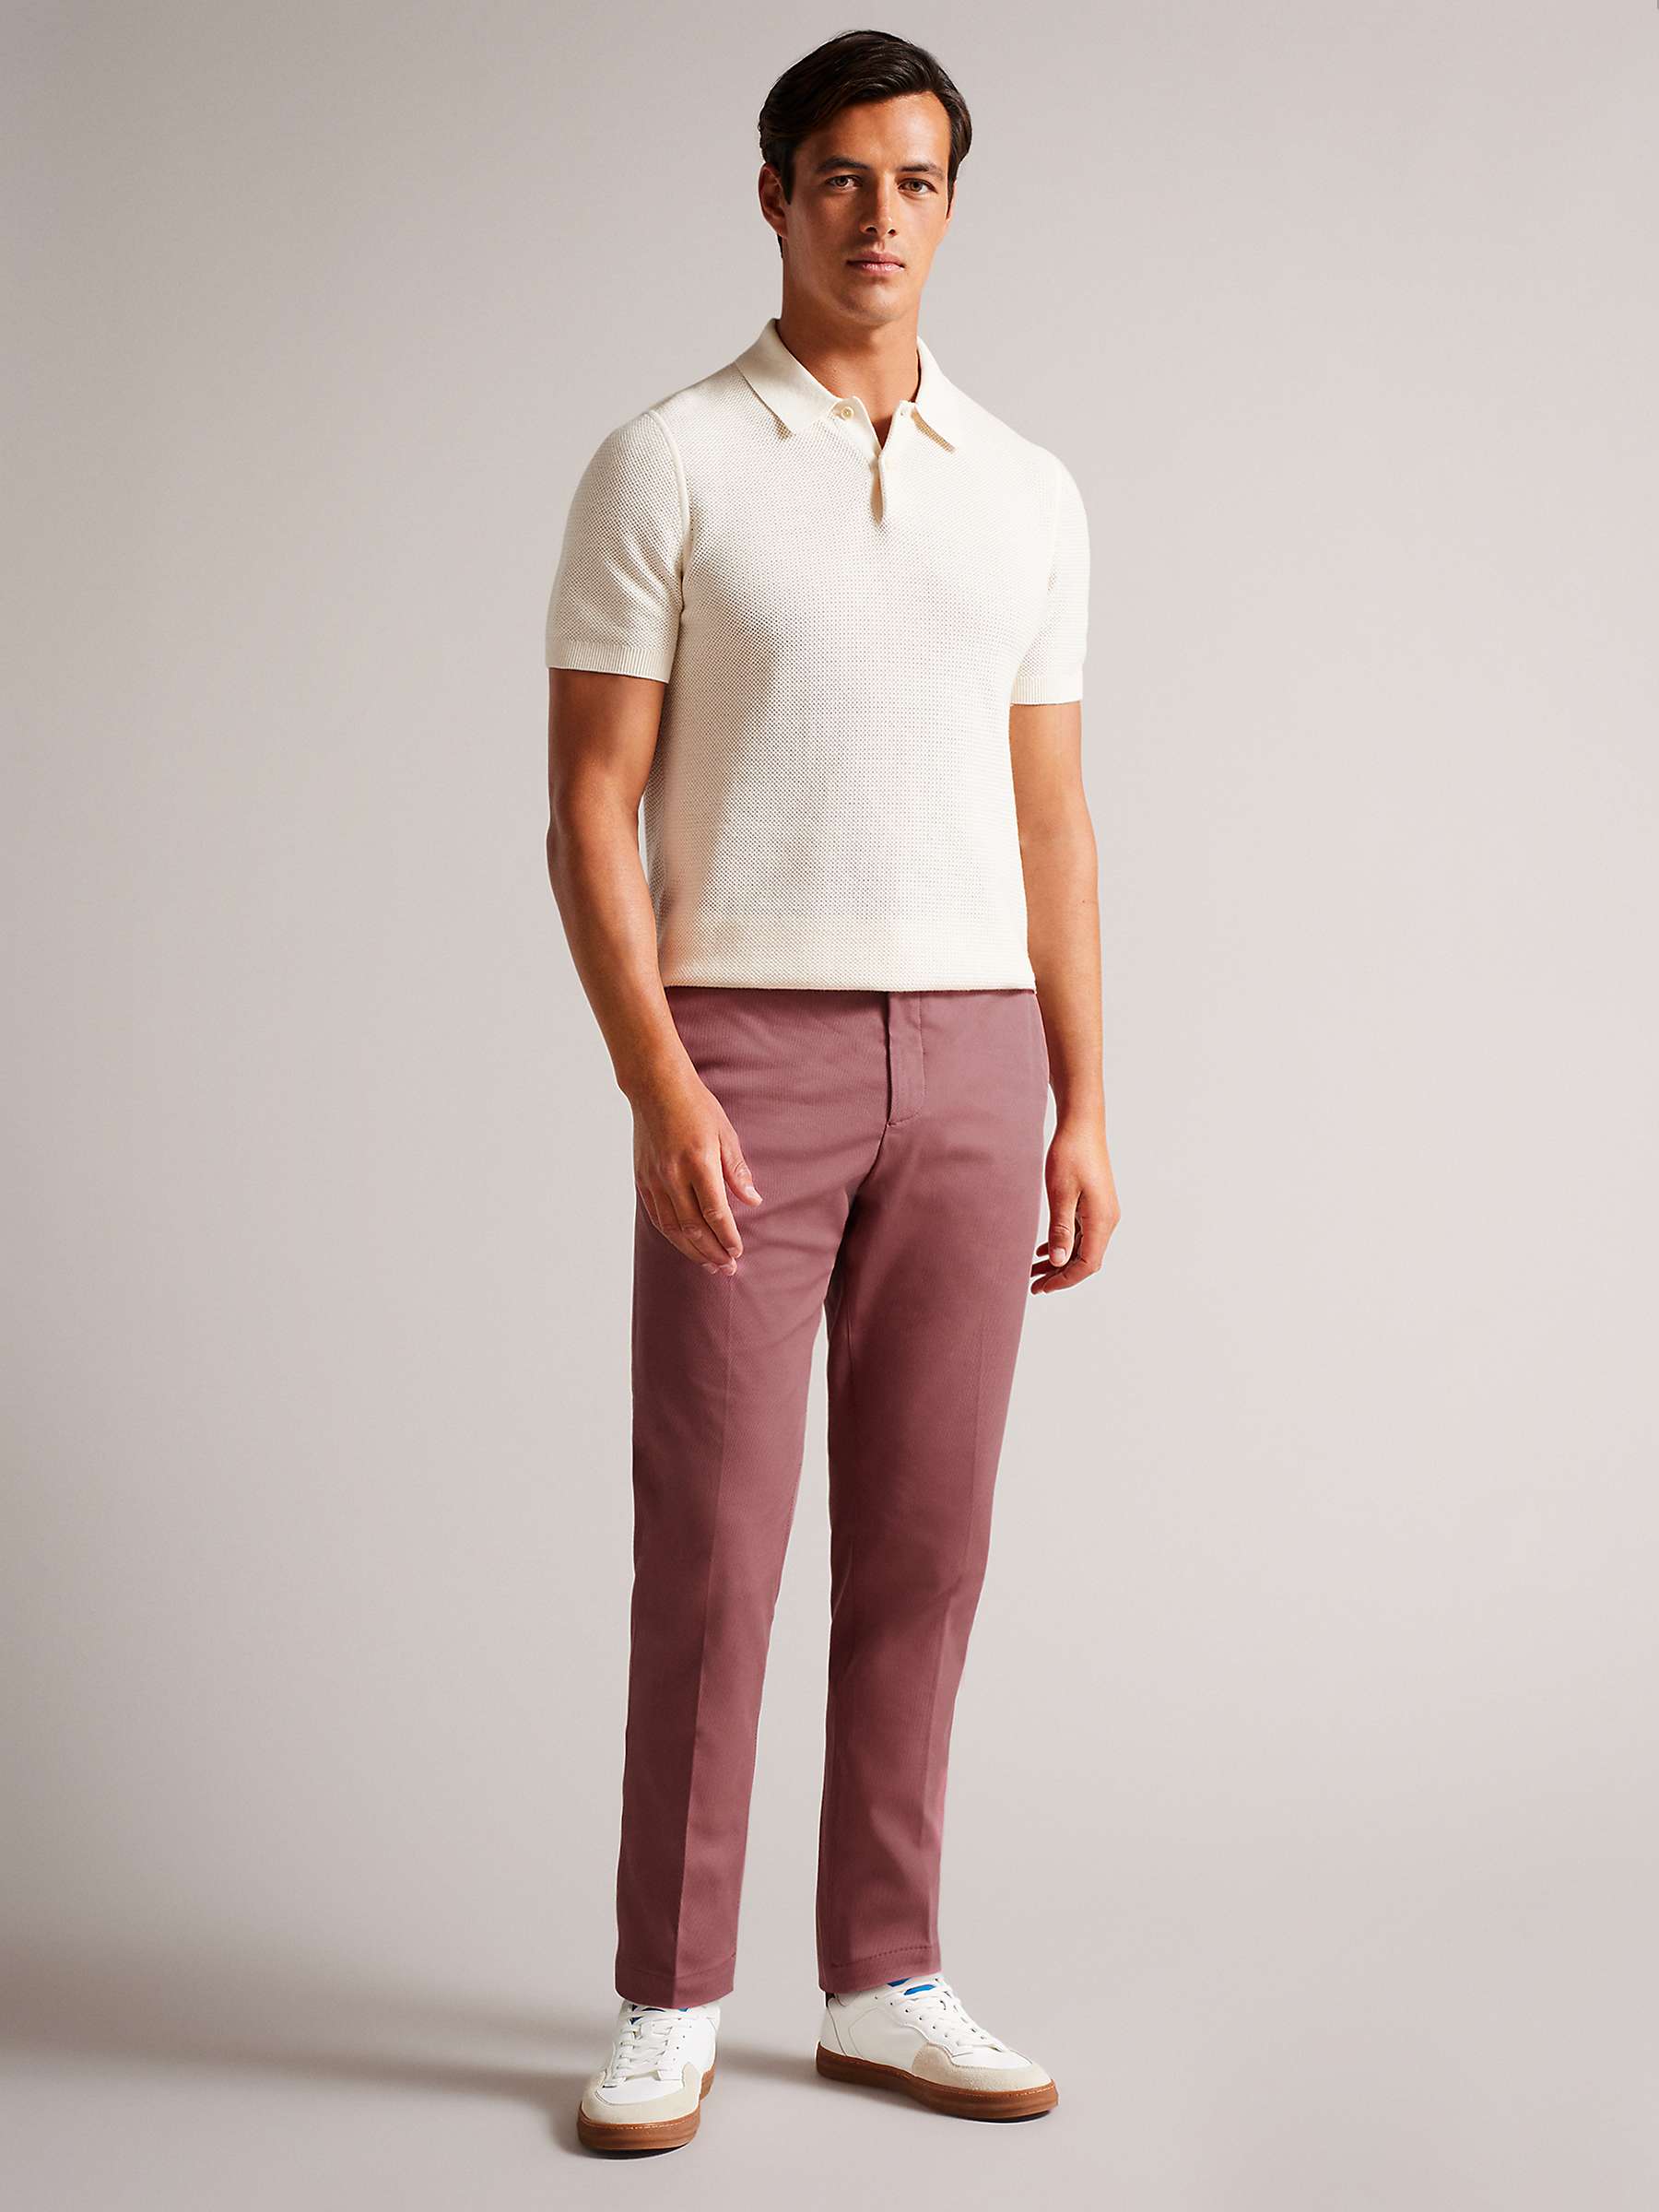 Buy Ted Baker Quarts Belted Straight Leg Trousers Online at johnlewis.com